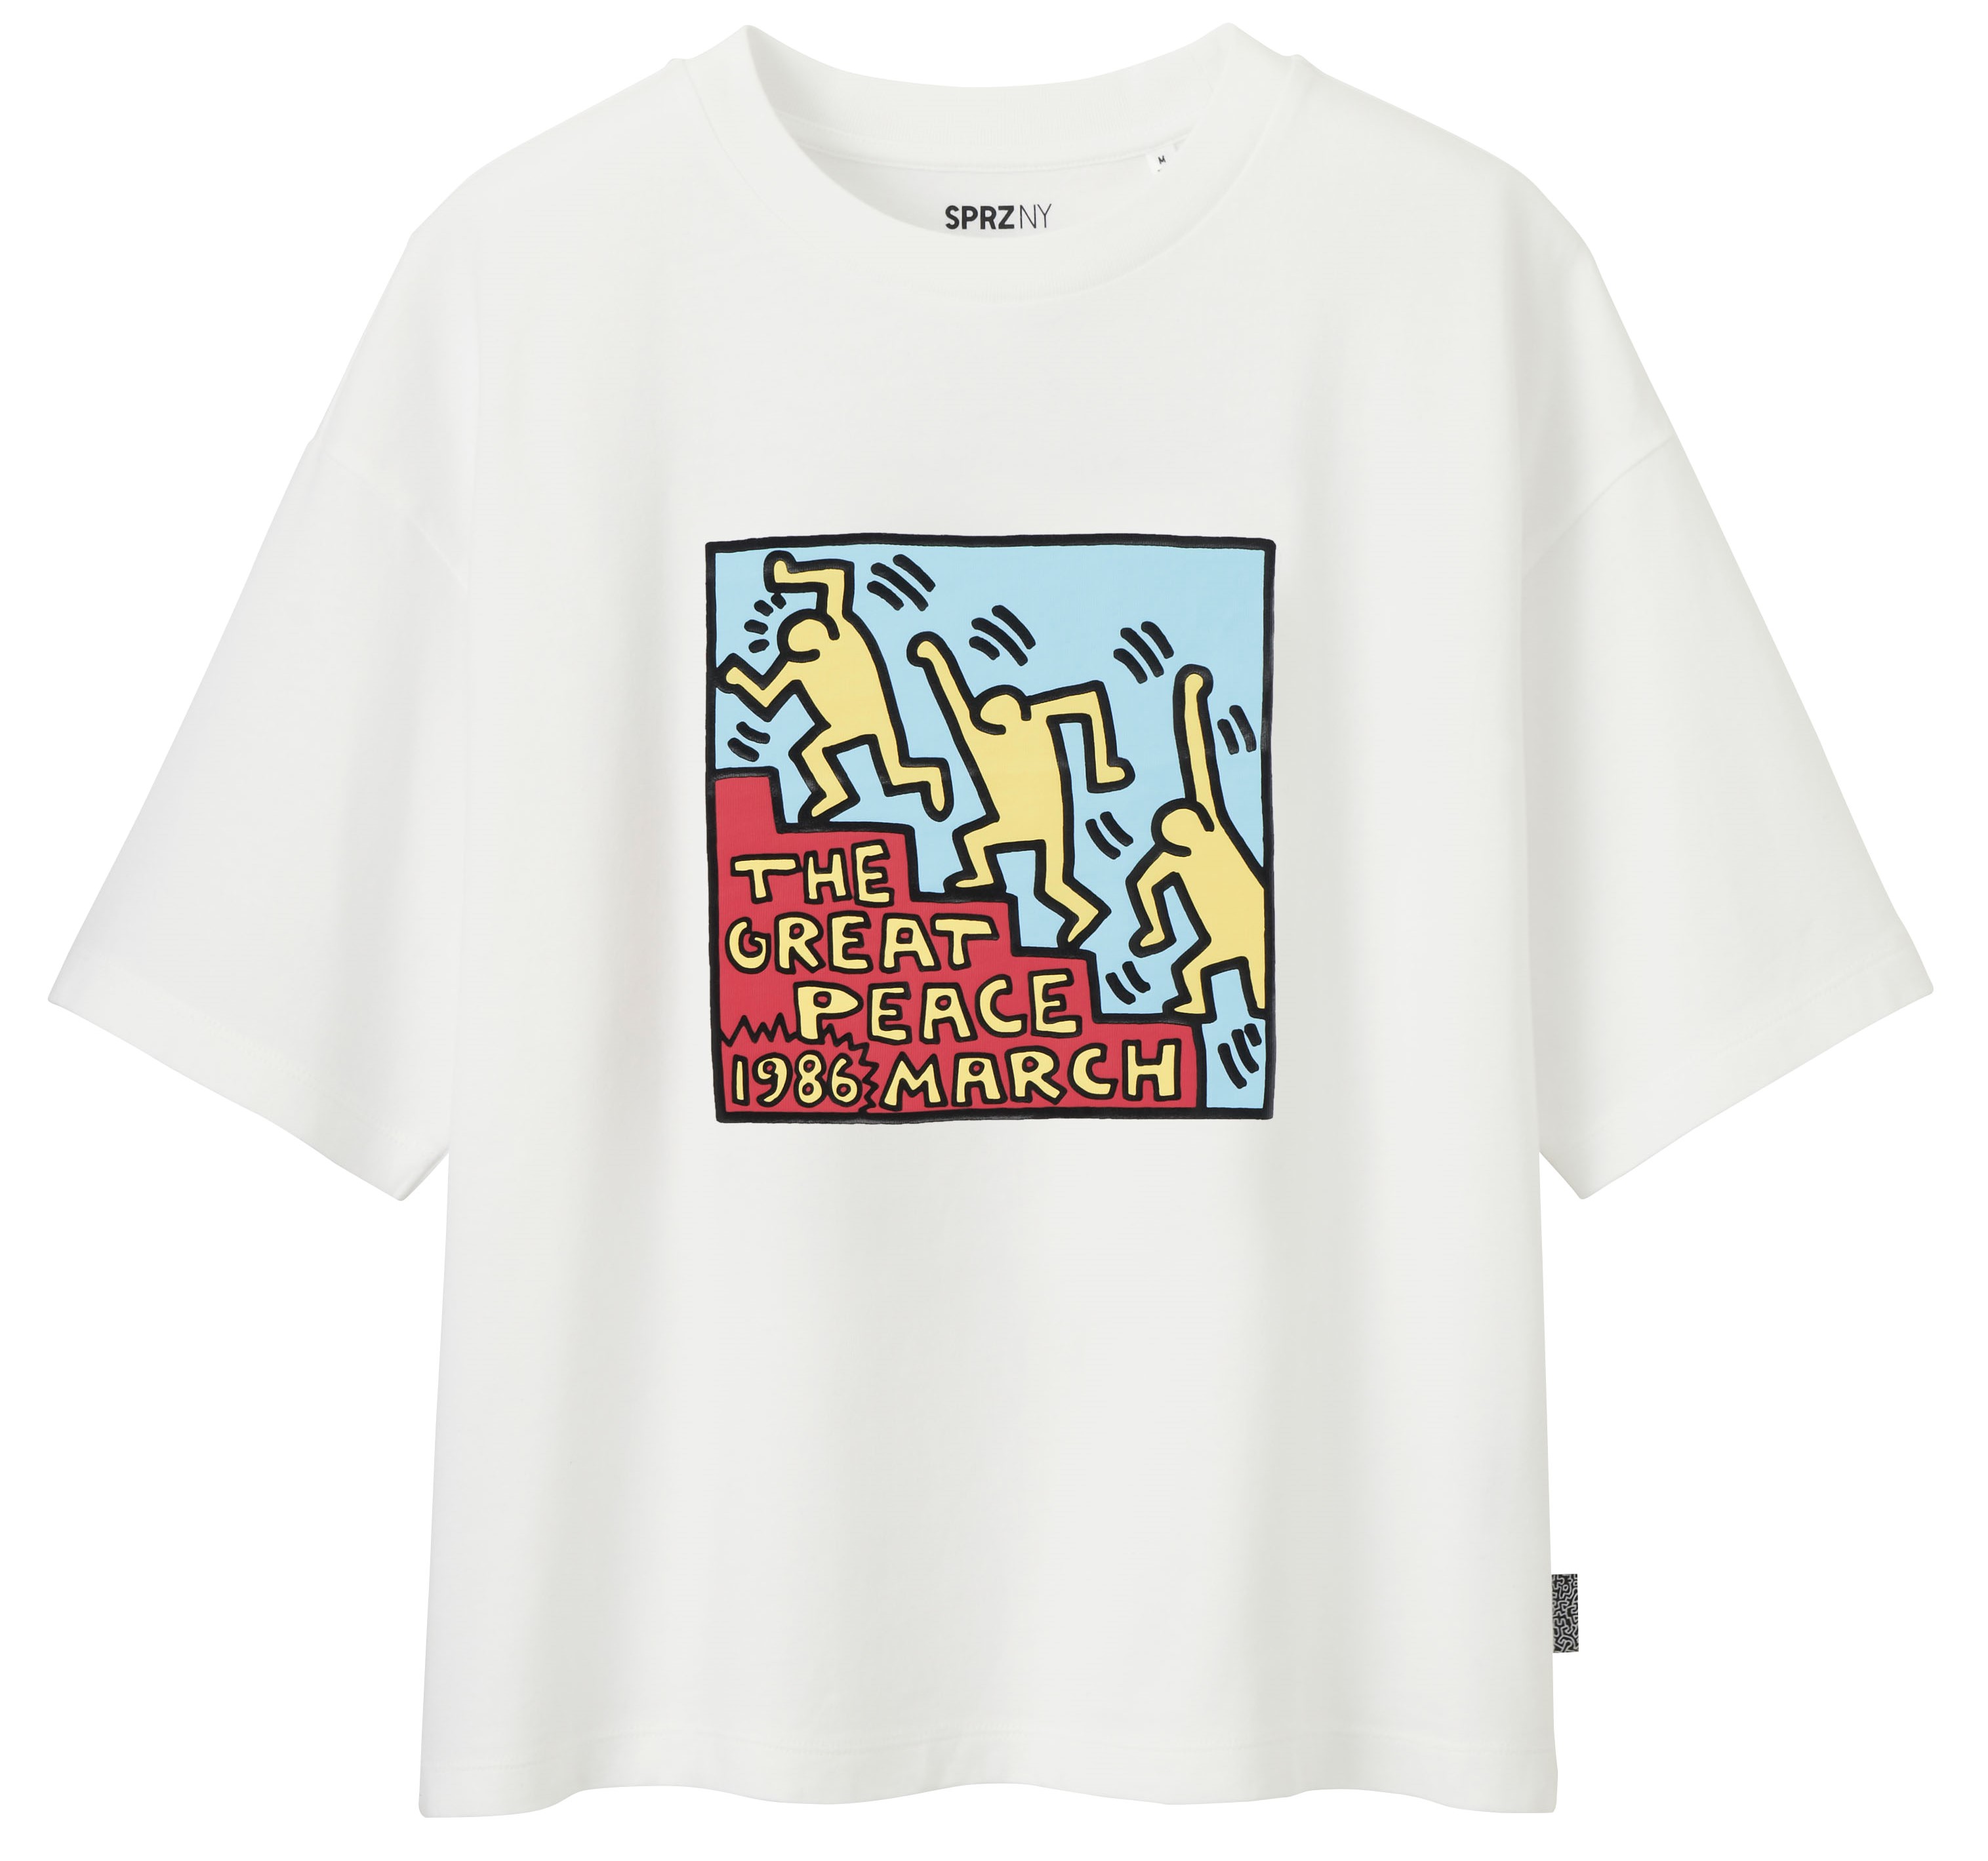 ws-sprz-ny-keith-haring-graphic-ss-t-shirt-fepop-shop_19-90192291_00_247n116f_a1_s